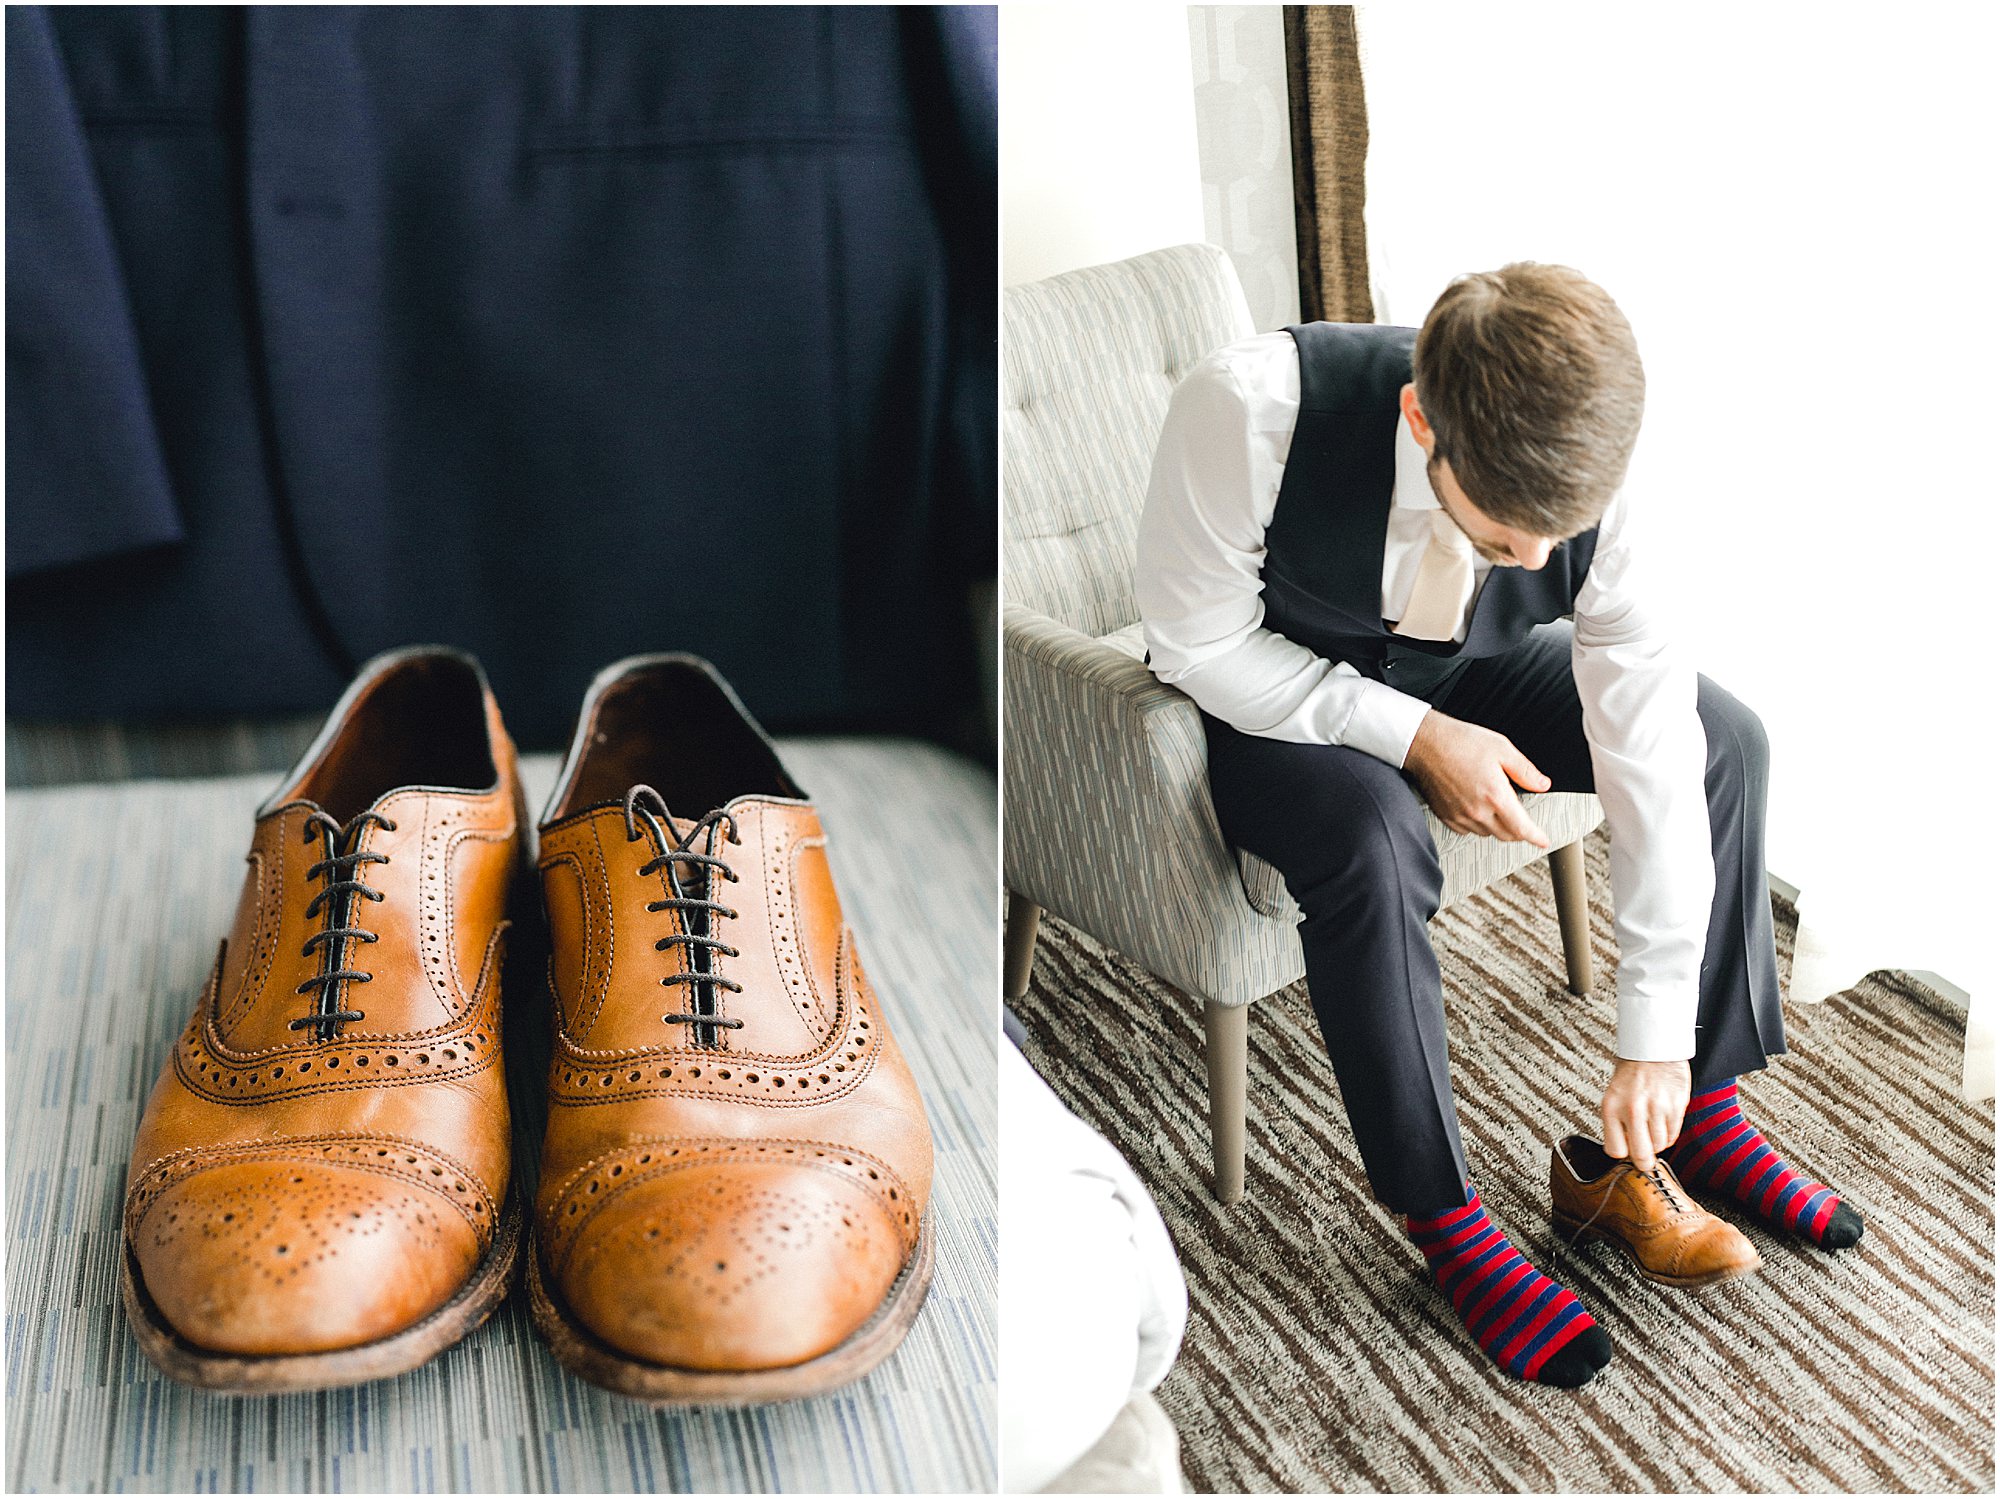 Groom putting on his shoes while wearing red striped socks.